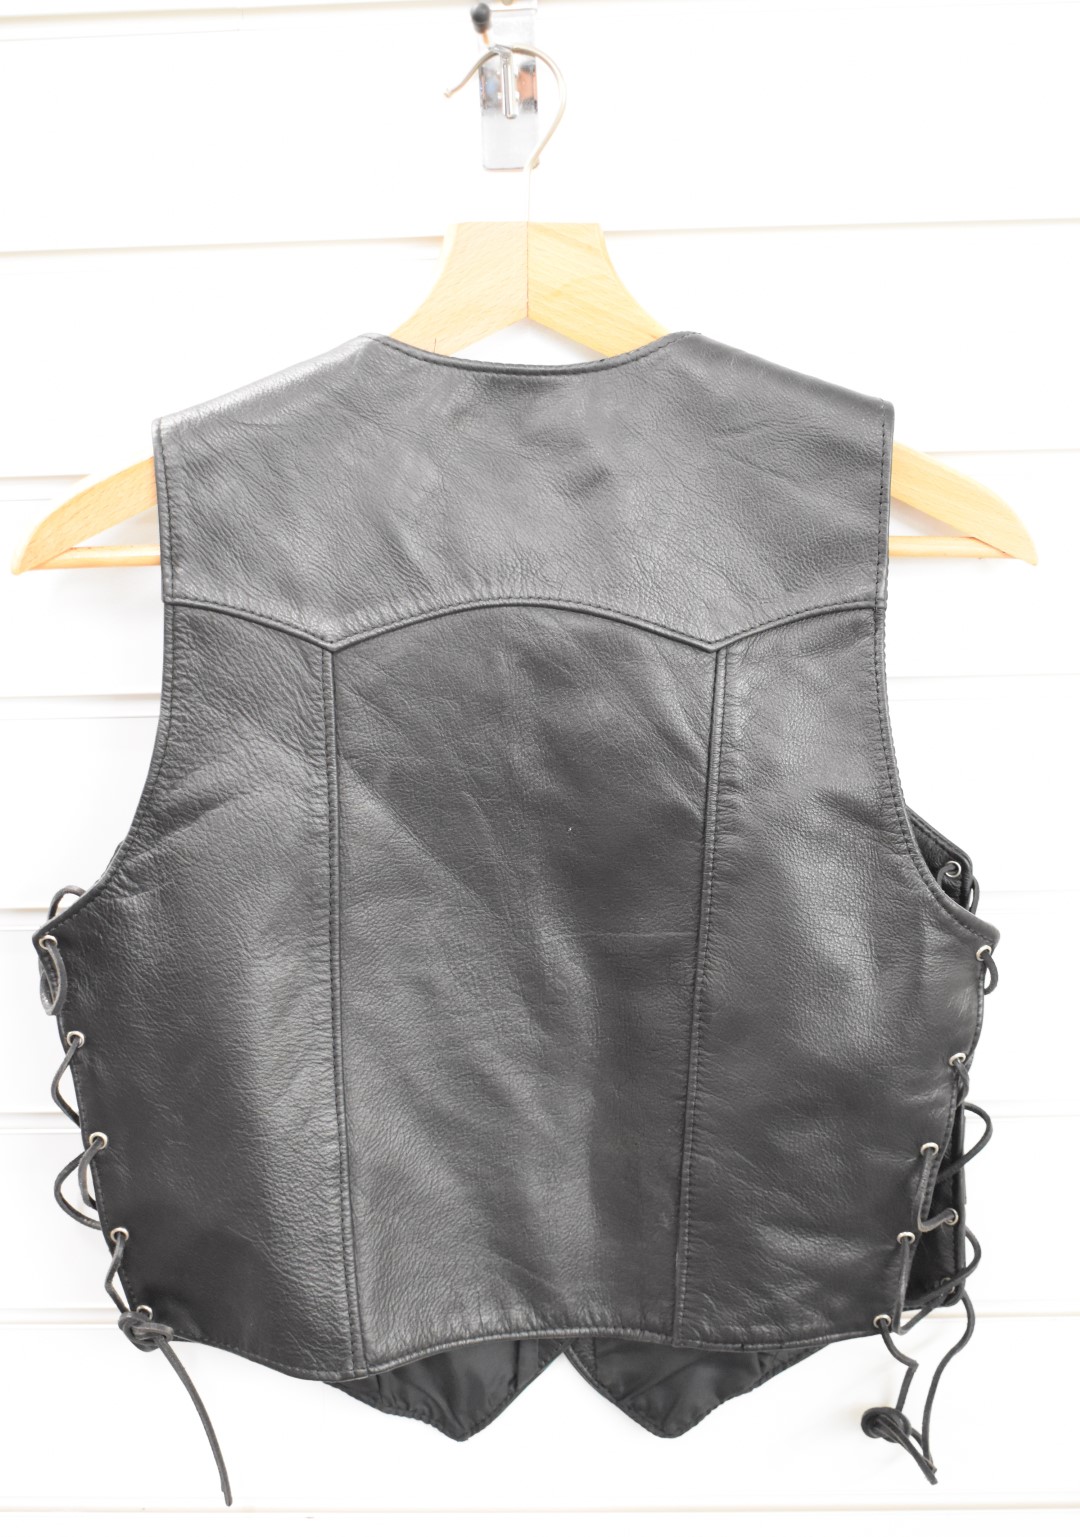 Hunter Class fringed leather motorcycle jacket and a waistcoat by Heavy Duty Leather Company, both - Image 10 of 24